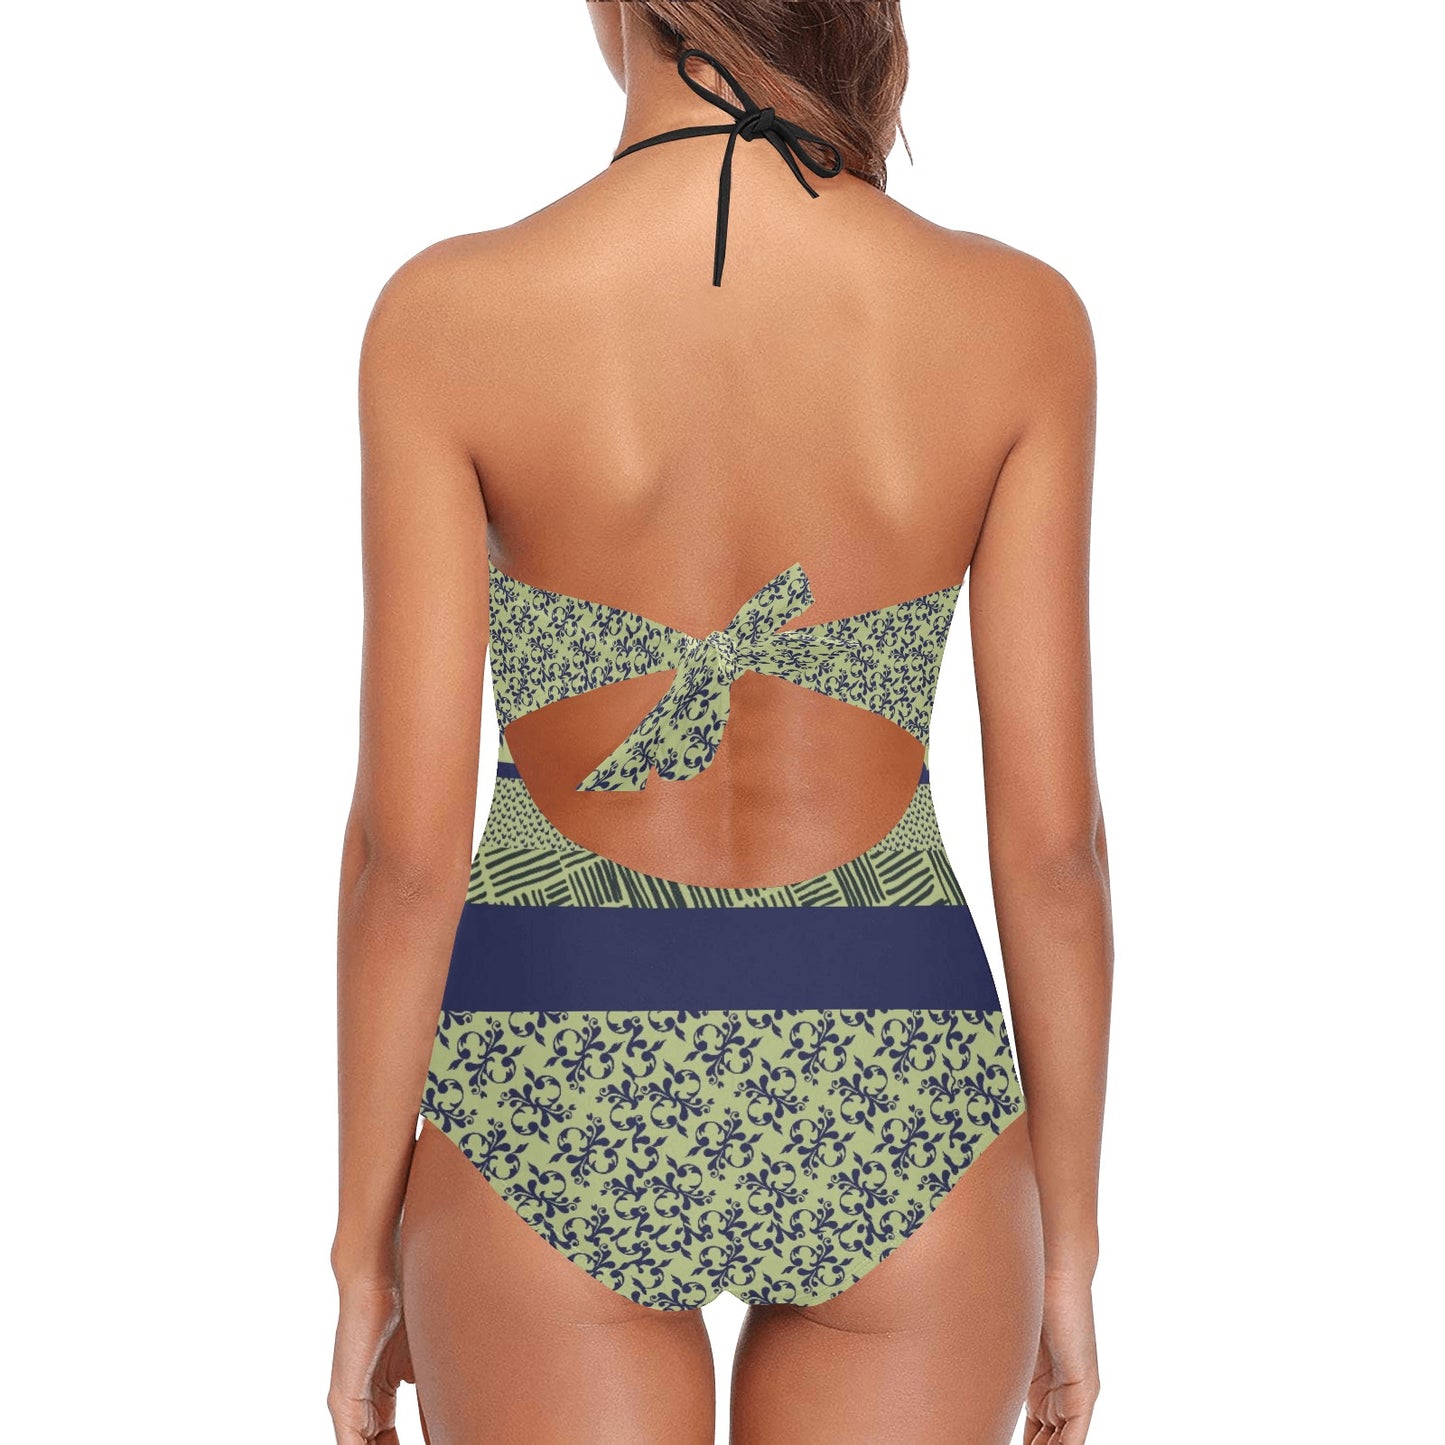 Caracas Collection Red Lace Band Swimsuit. Design hand-painted by the Designer Maria Alejandra Echenique